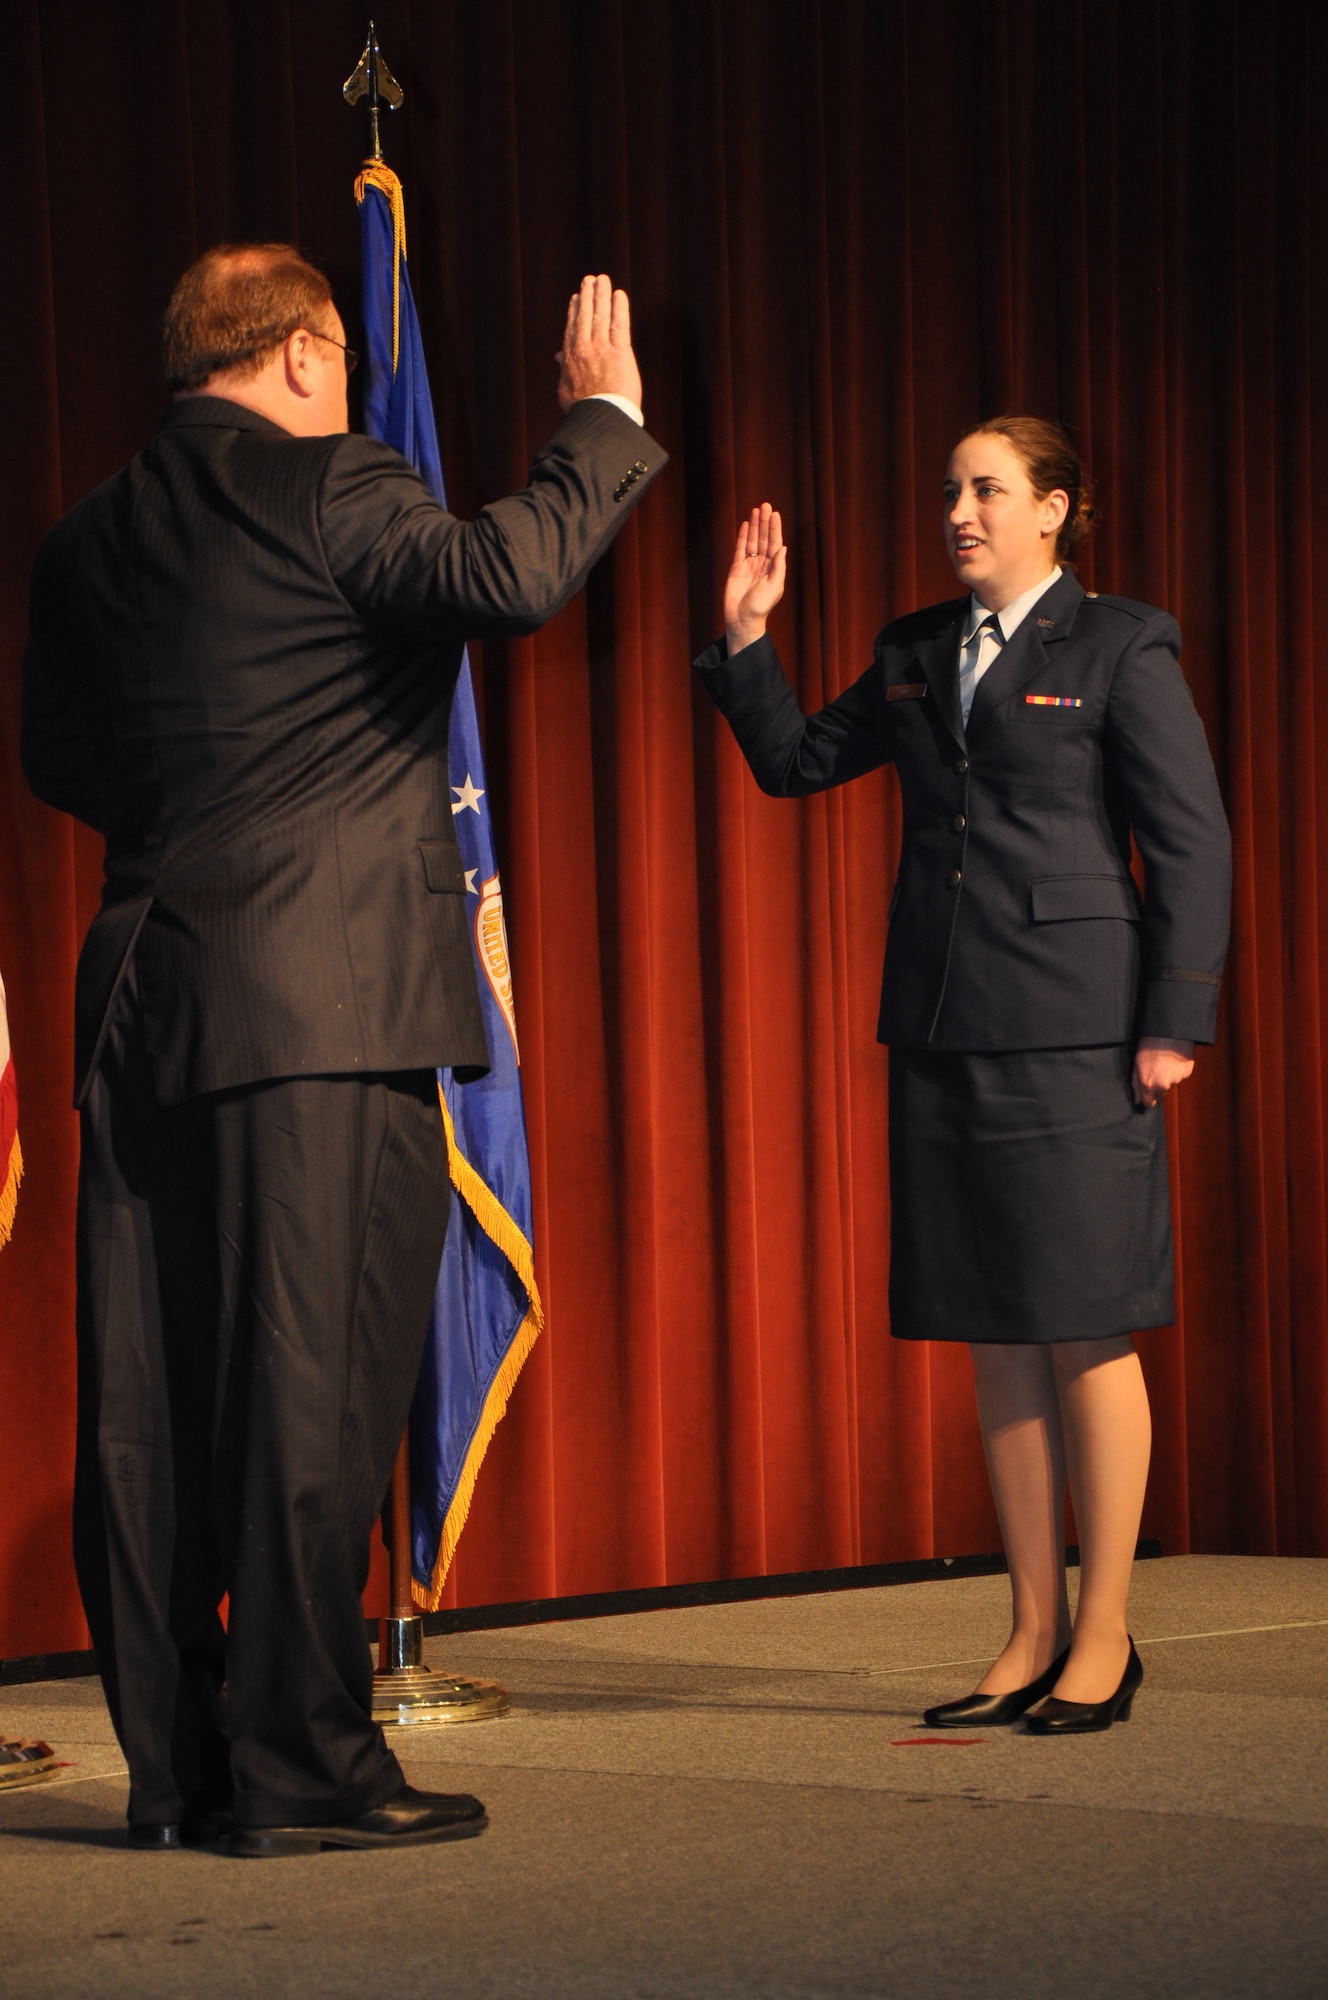 SAN ANGLEO, Texas - 2nd Lt. Allysen Vance, former Angelo State University Air Force ROTC Detachment 847 cadet, swears into service at the ASU Houston Harte University Center here, May 10. Vance chose Retired Col. Robert Vance, her father, to commission her. (U.S. Air Force photo/ Airman 1st Class Joshua Edwards)